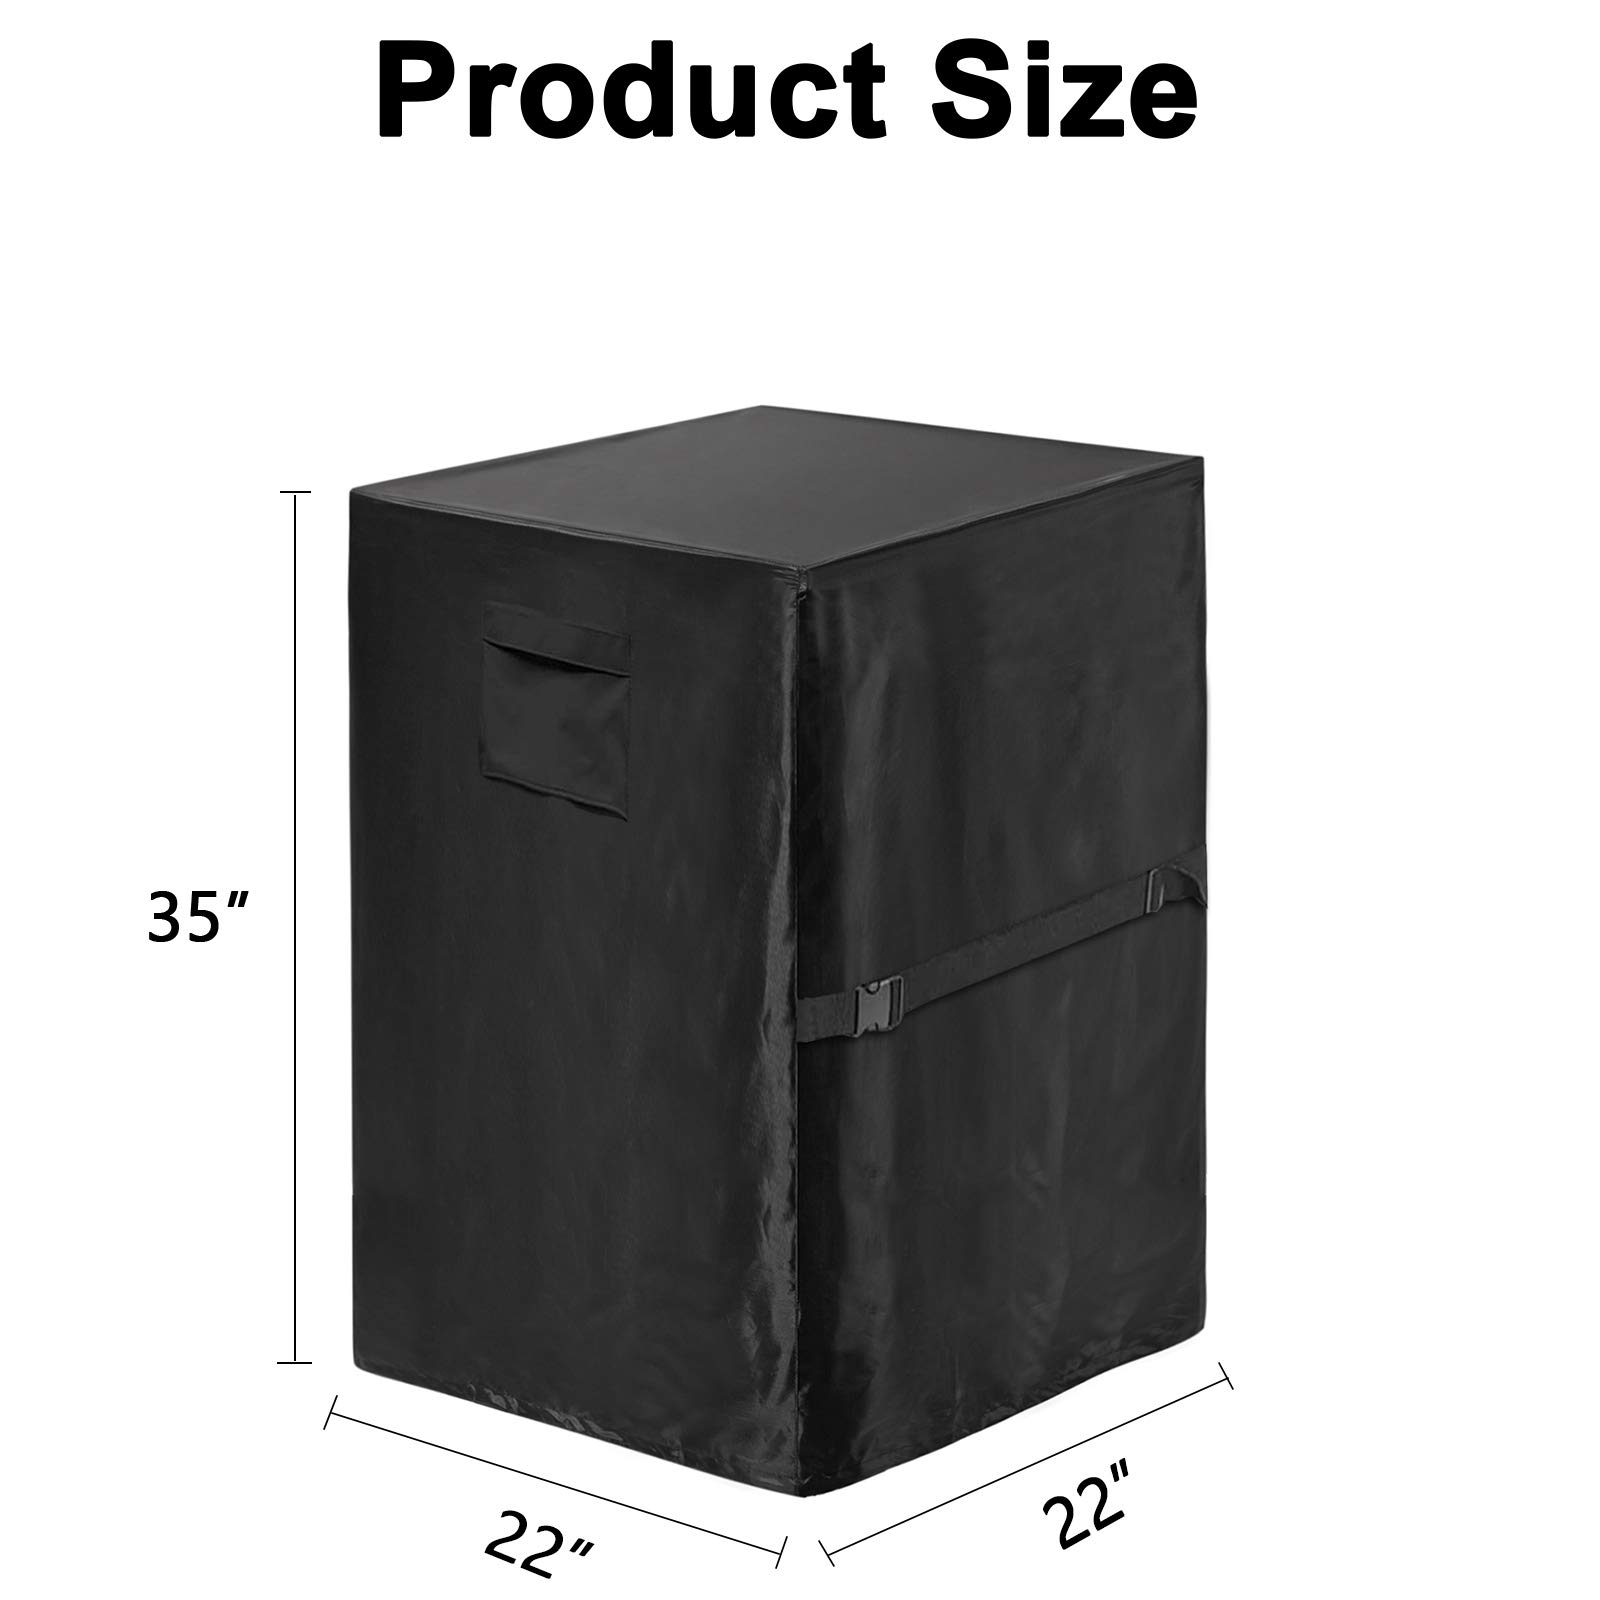 WOMACO Patio Fire Column Cover 21 Inch Waterproof Outdoor Tall Fire Pit Mini Fridge Covers for Outside Propane Fire Column Protector Water-Resistant Refrigerator Cover (21" L x 21" W x 35" H, Black)